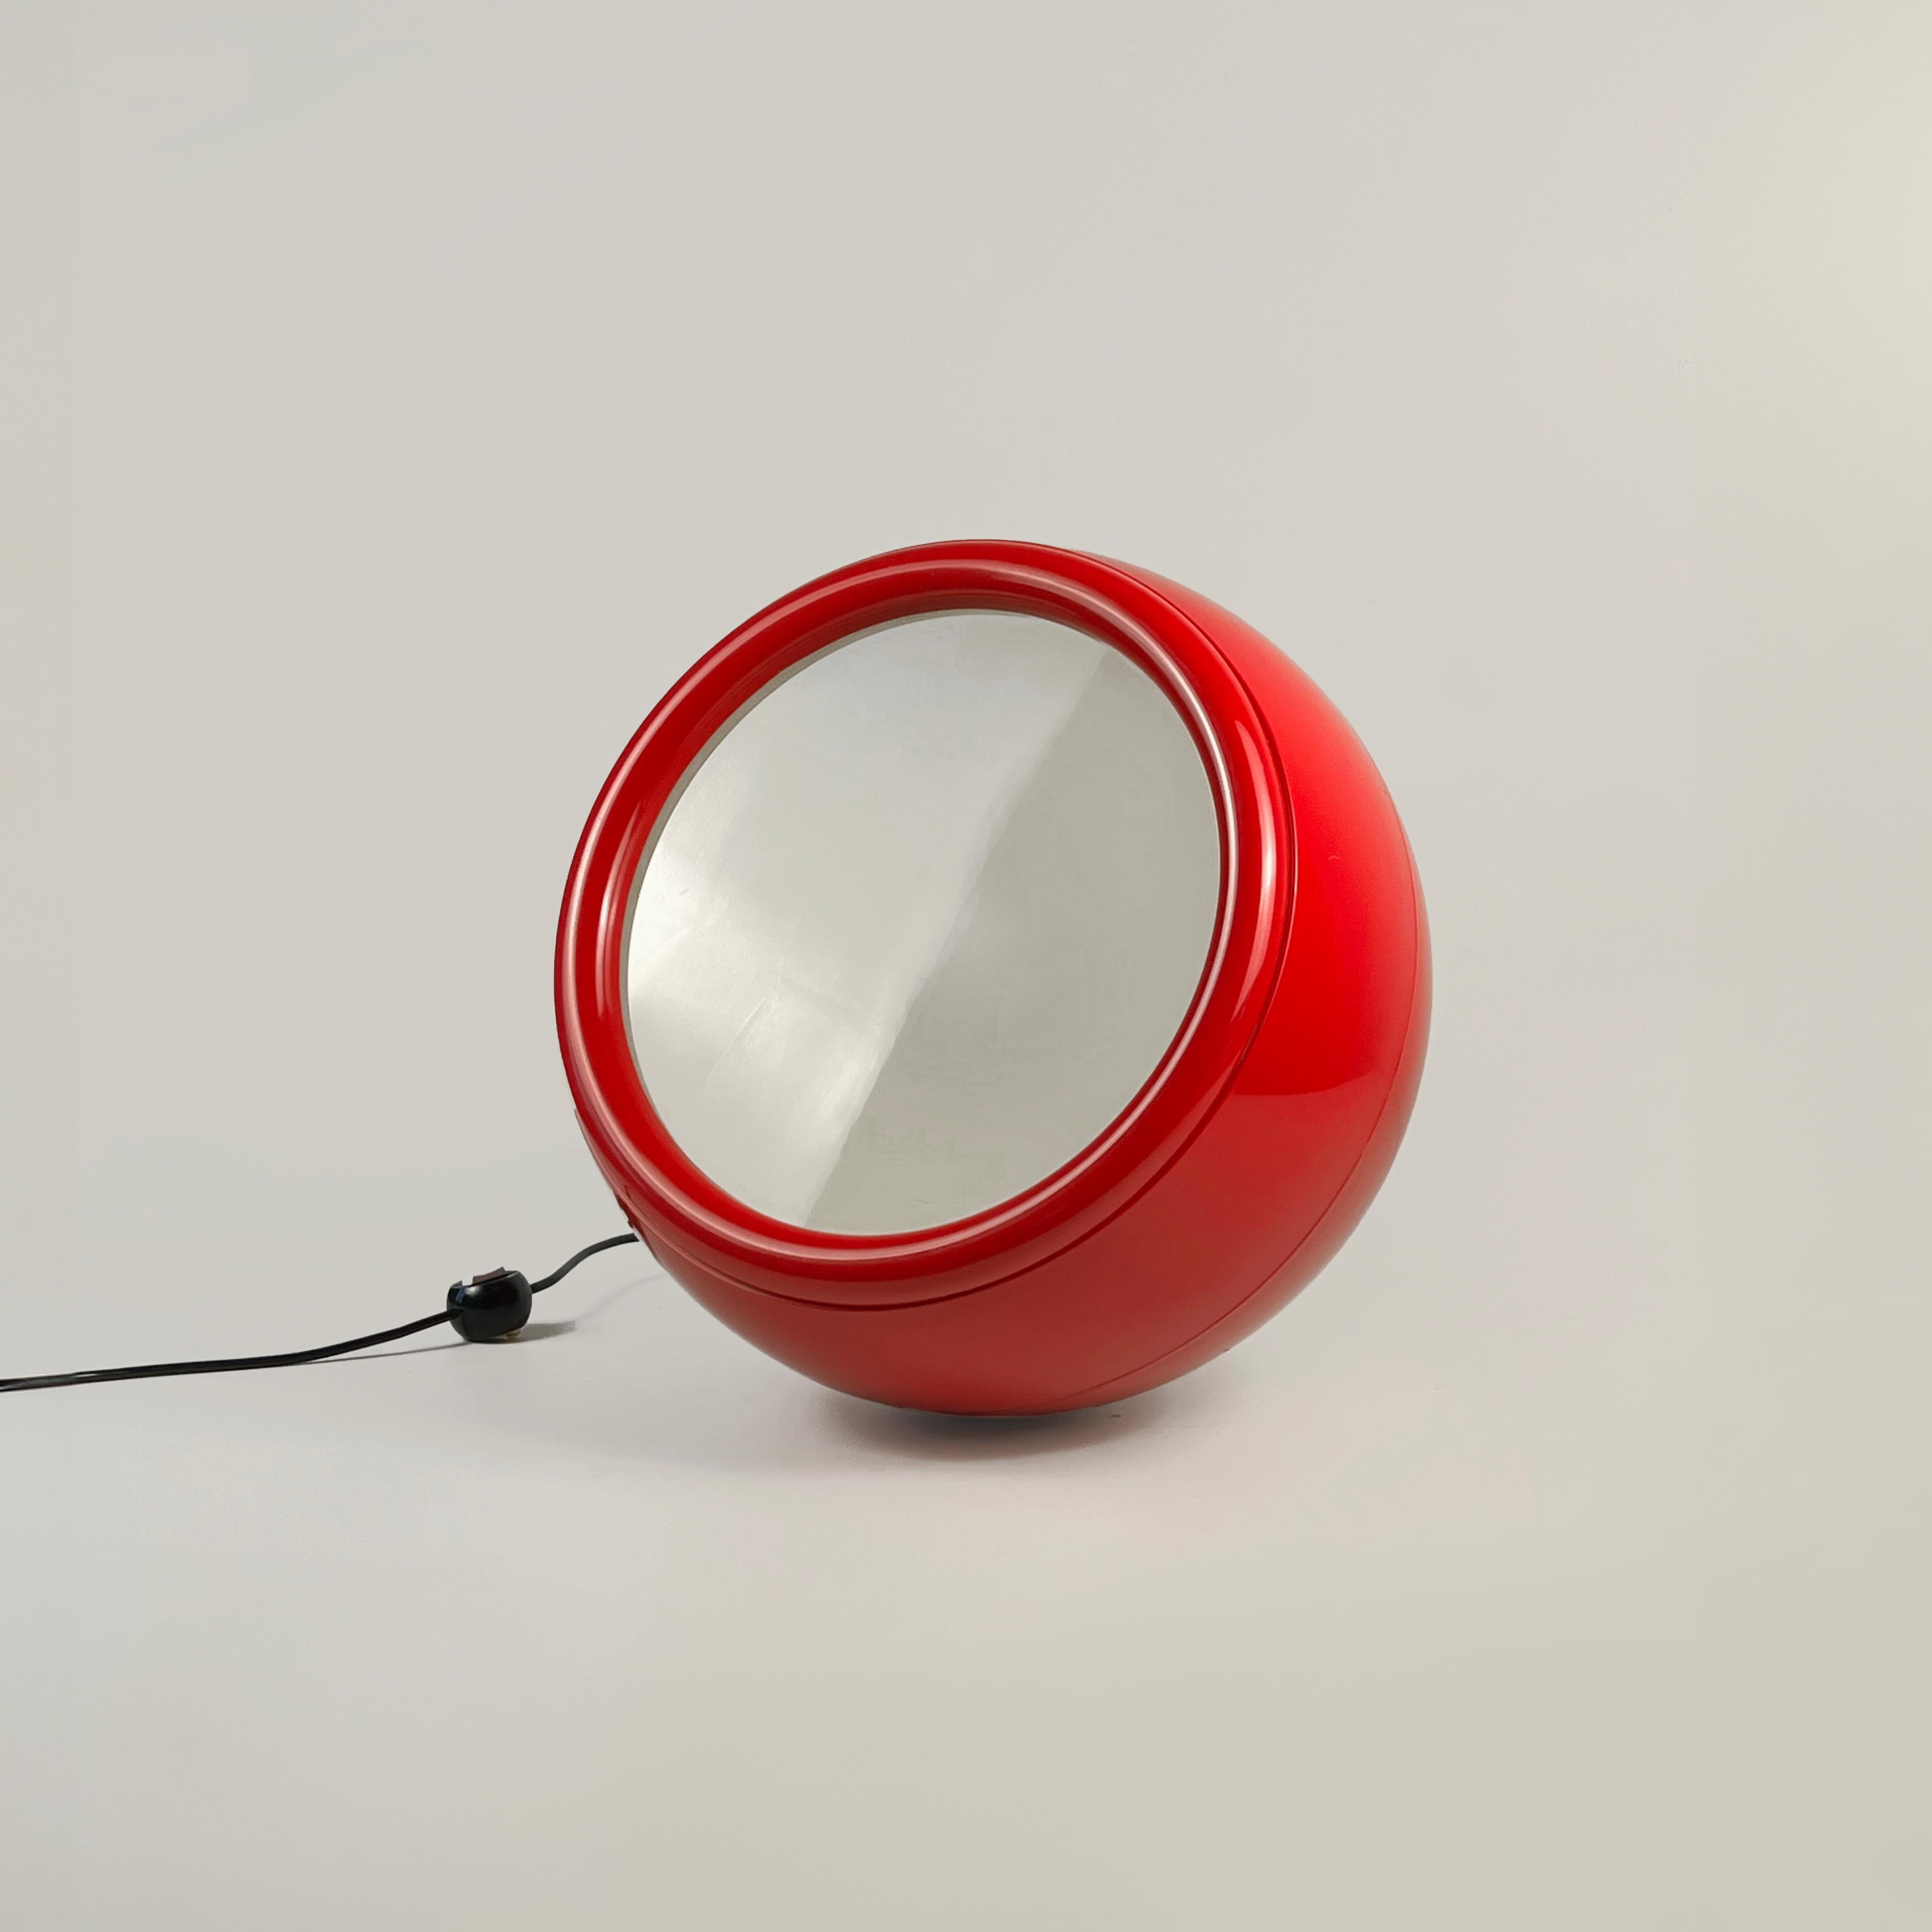 Italian Red Pallade (1st Ed. 1968) floor lamp designed by Studio Tetrarch for Artemide For Sale